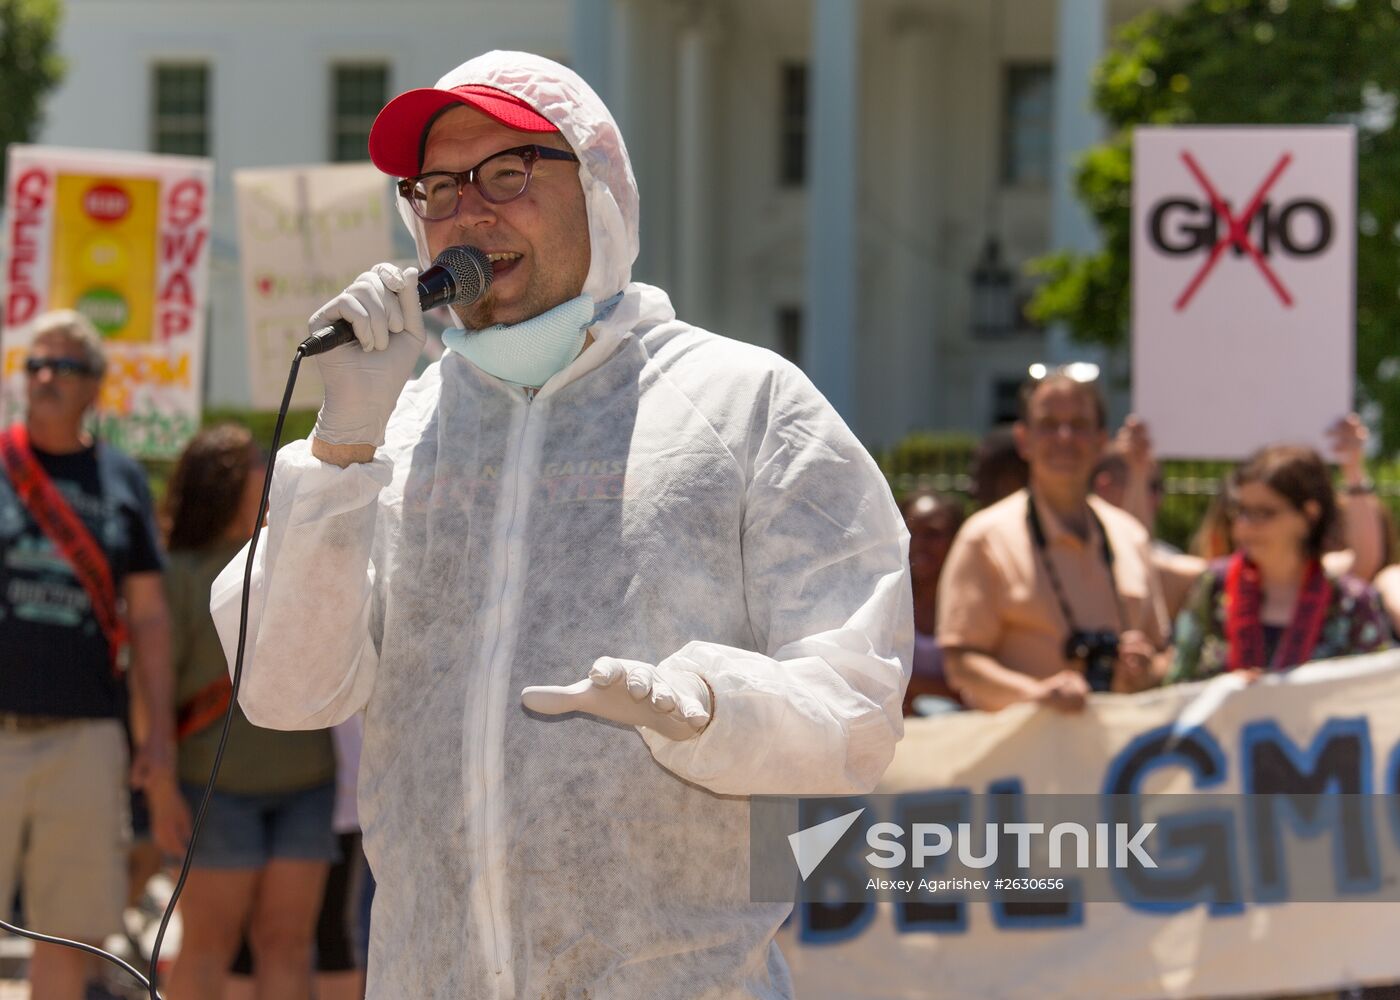 March Against Monsanto is held to protest against GMO food